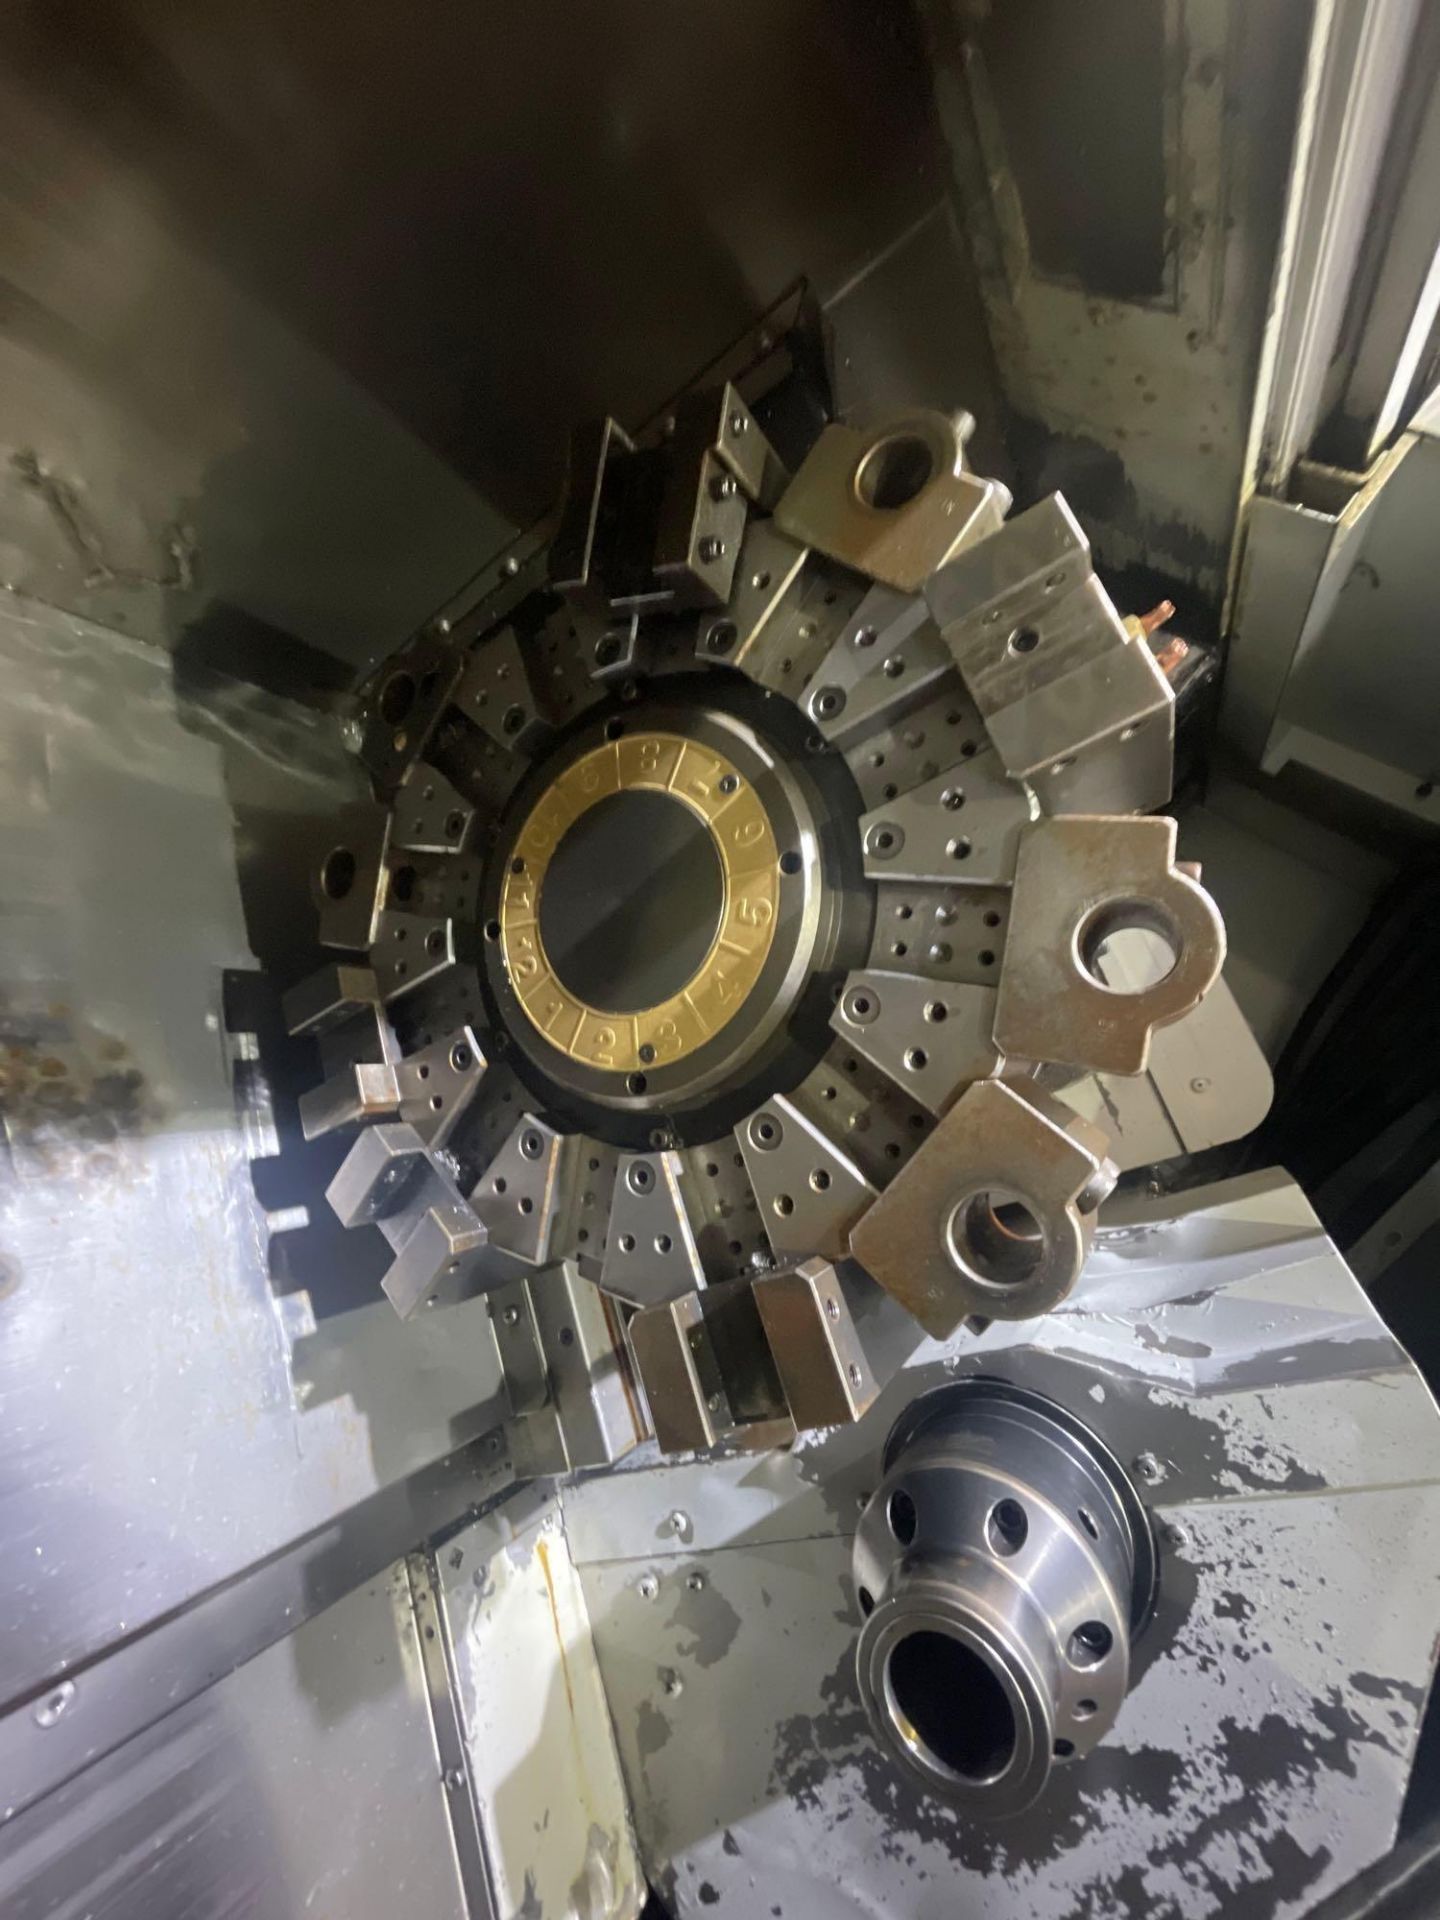 Mori Seiki SL-150S CNC Turning Center with Sub Spindle - Image 9 of 24